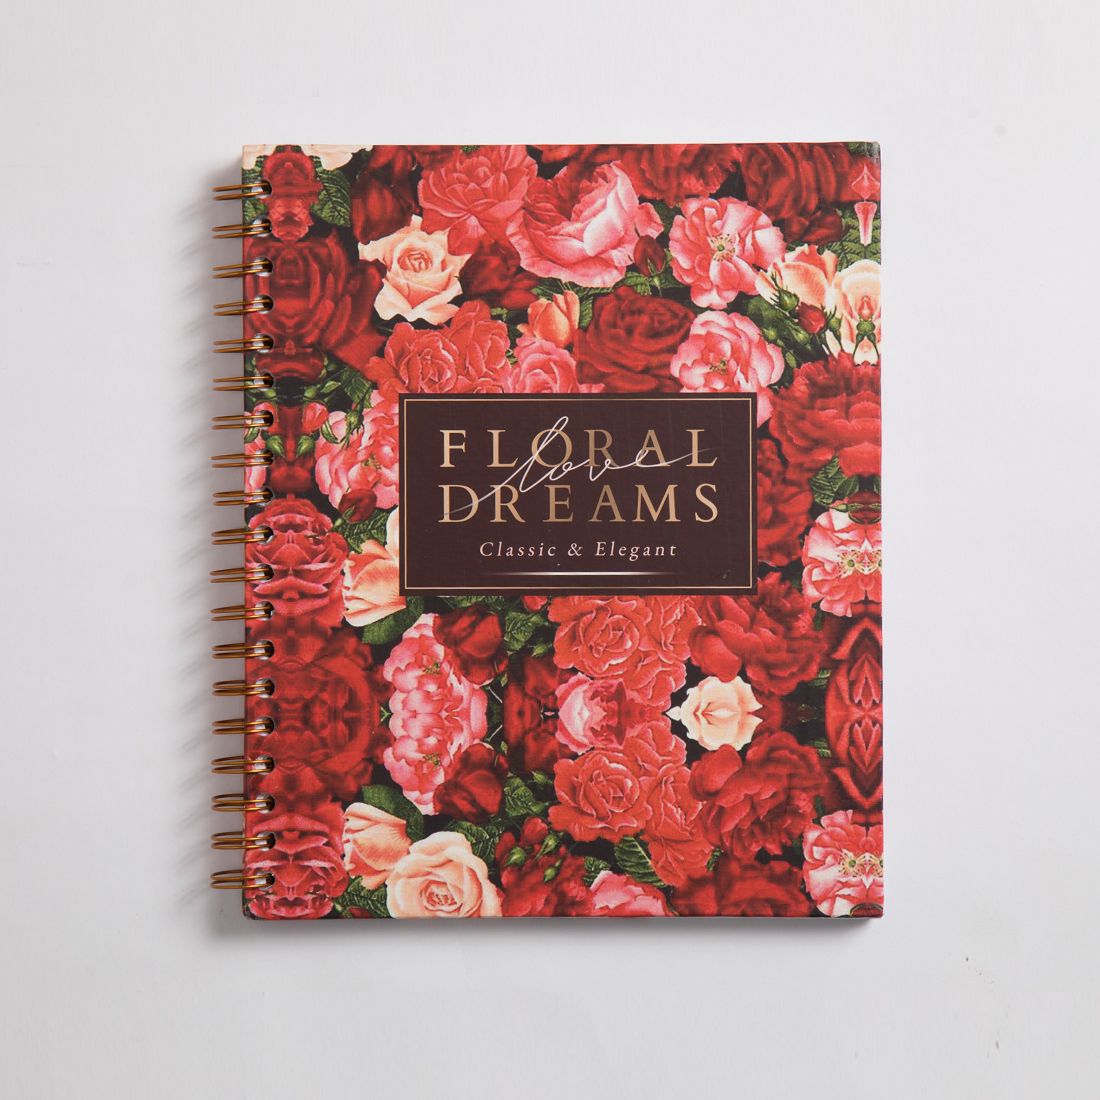 Floral Dreams Notebook A4 Size -3 Subjects